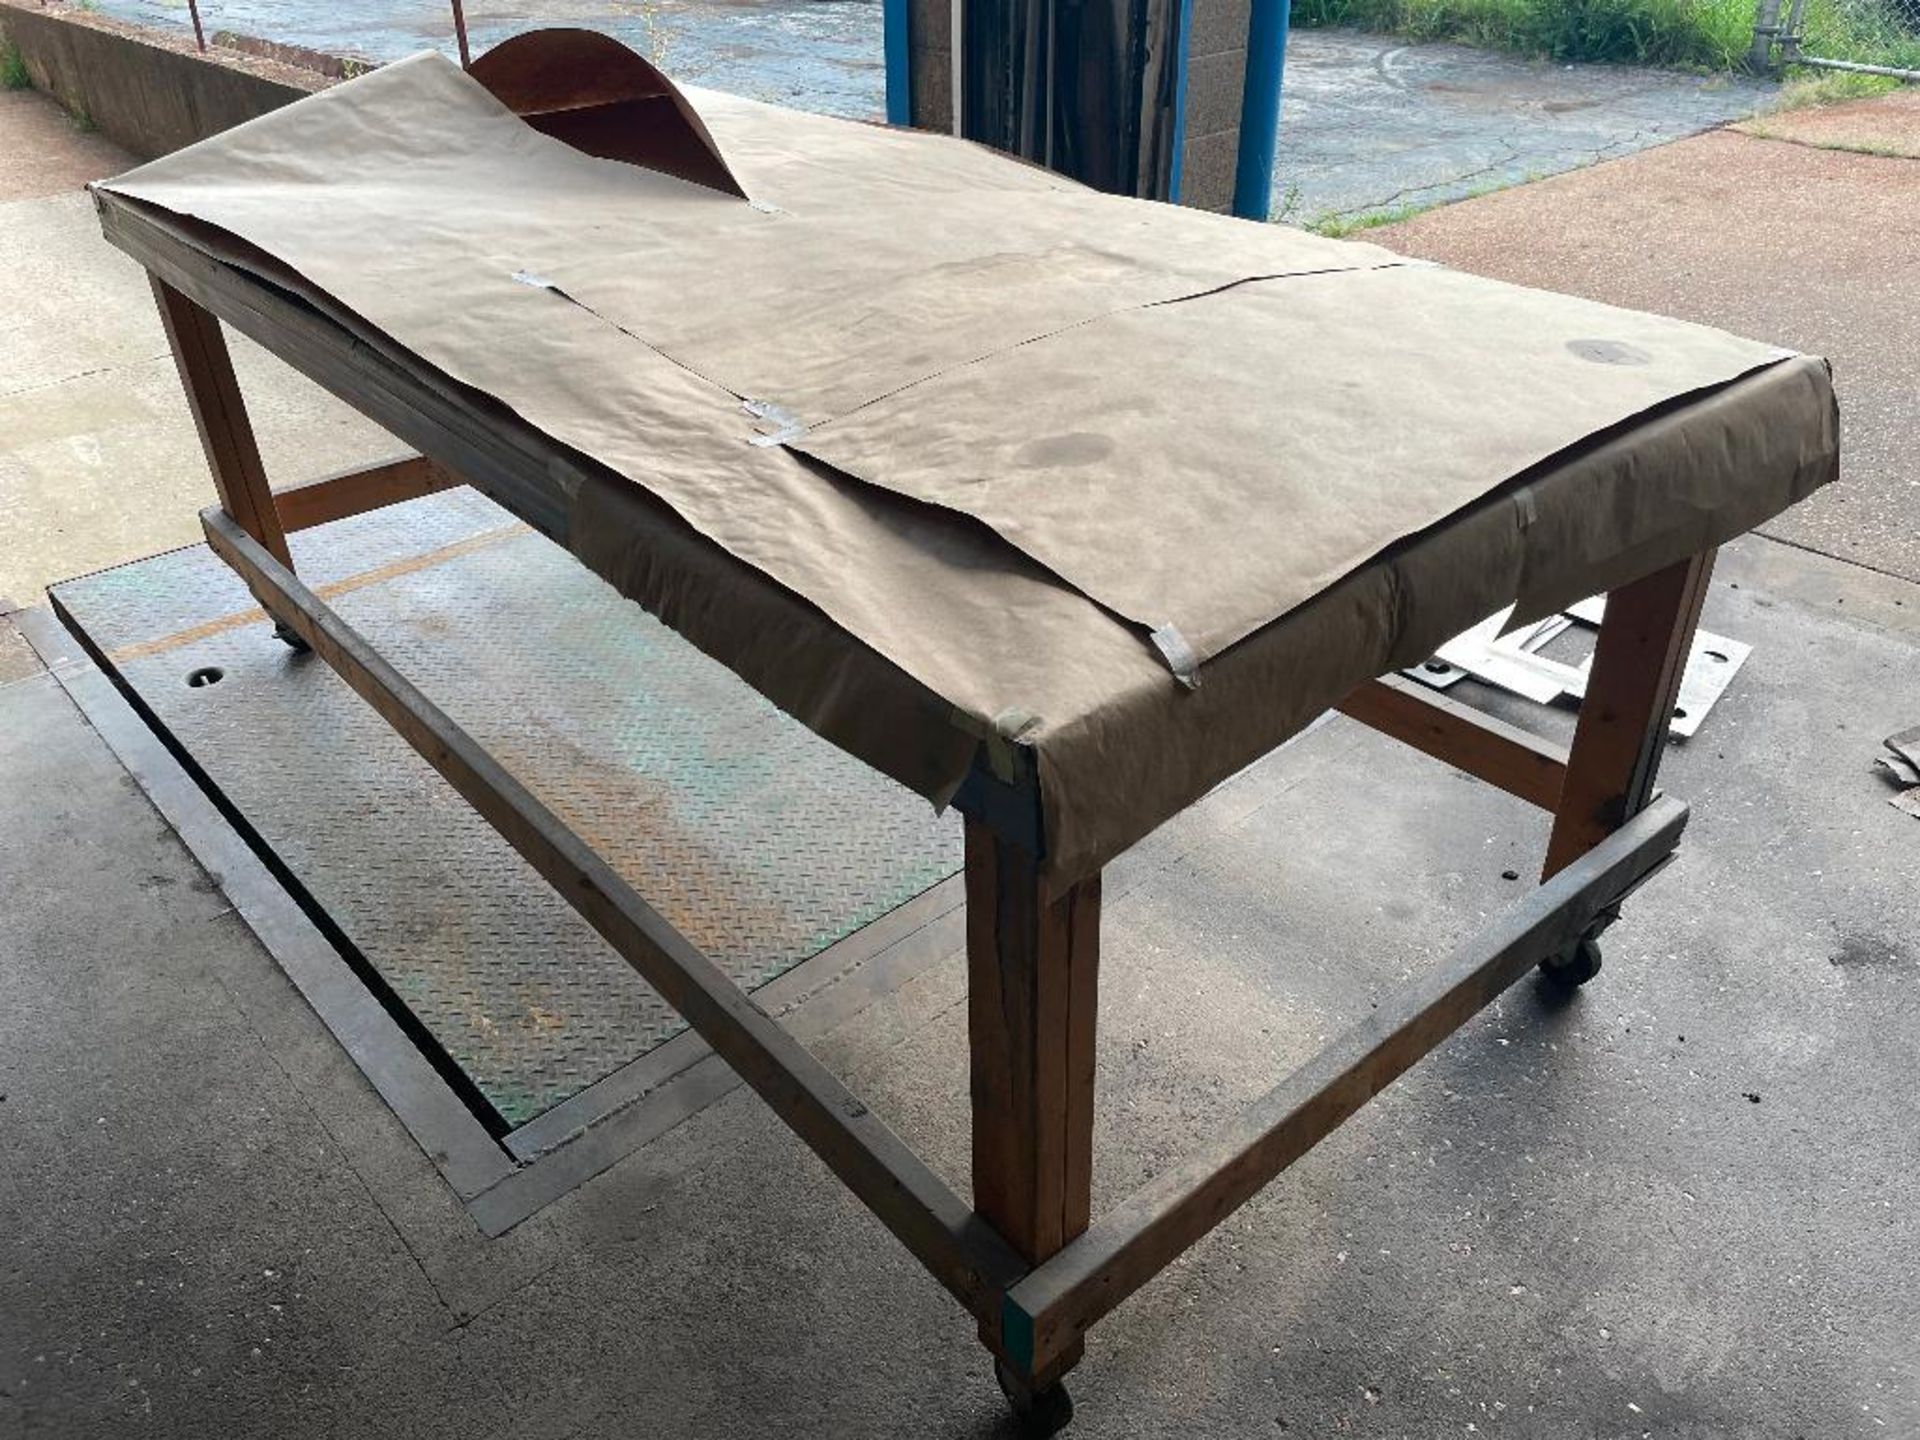 DESCRIPTION: 8' X 3' WOODEN FABRICATION TABLE ON CASTERS ADDITIONAL INFORMATION NO CONTENTS SIZE: 8'